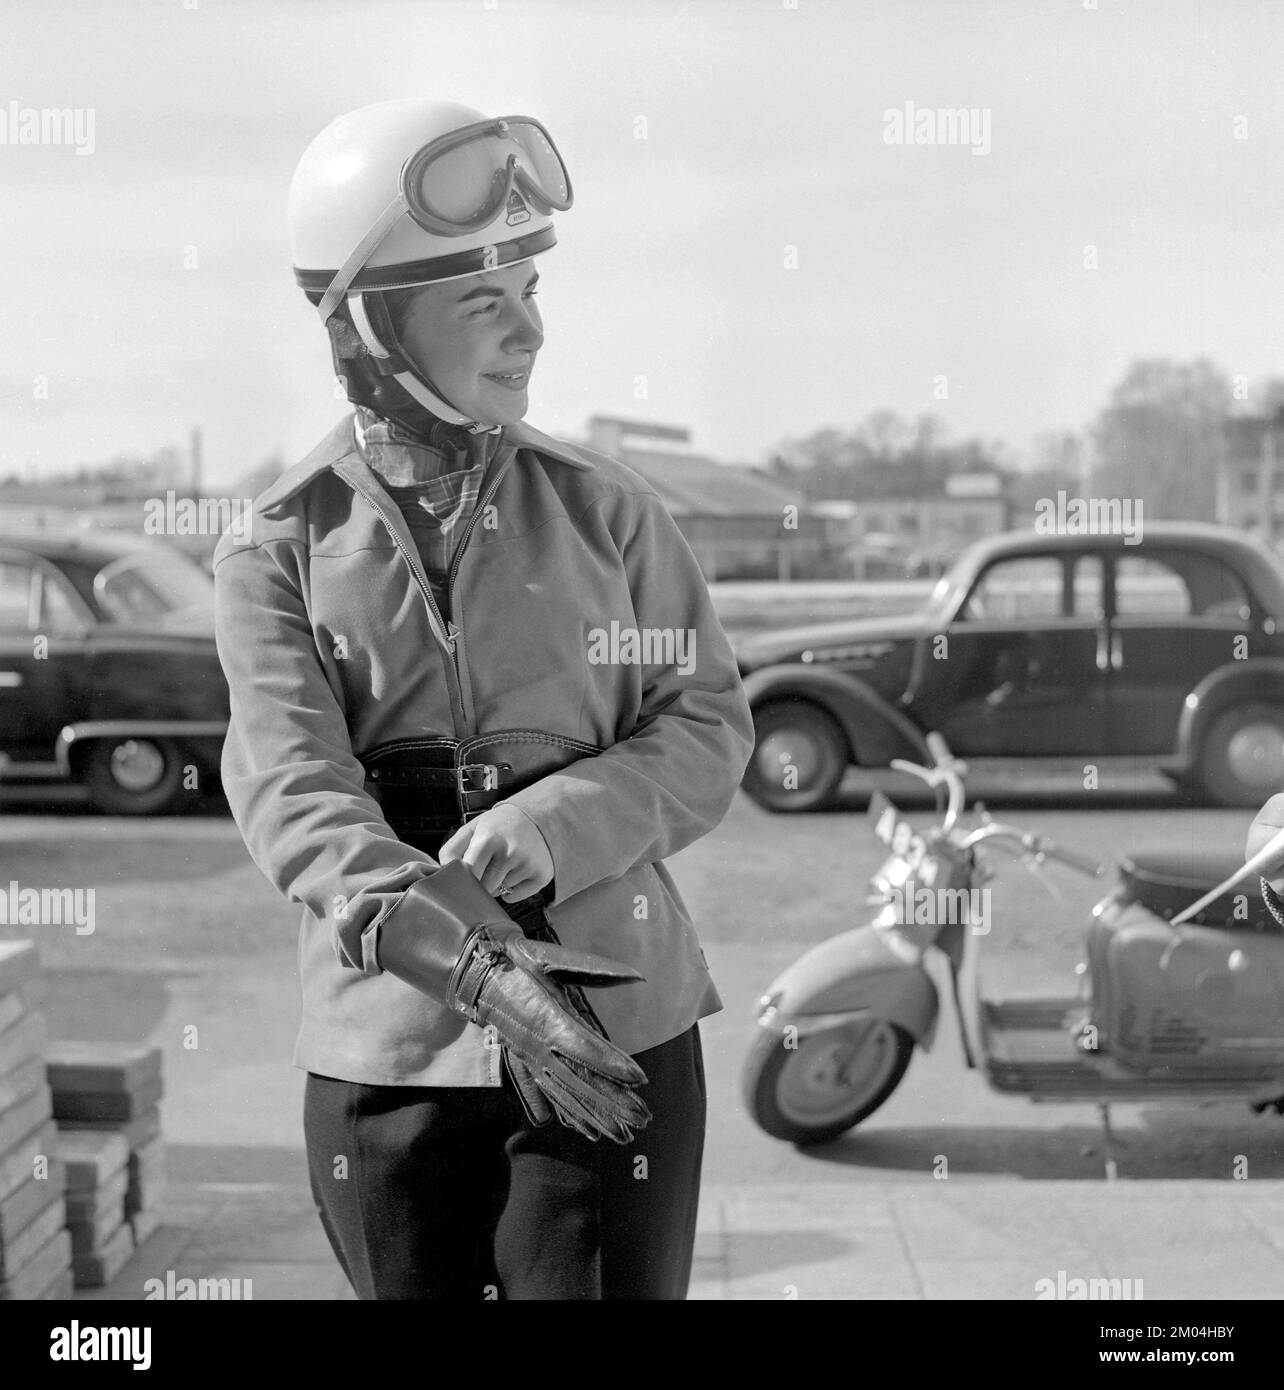 In the 1950s. A young woman seen on a german made Puch scooter. The female driver is wearing the typical motorcycle clothing and accessories of the decade, helmet, jacket, kidney belt and gloves. Sweden 1955 Stock Photo